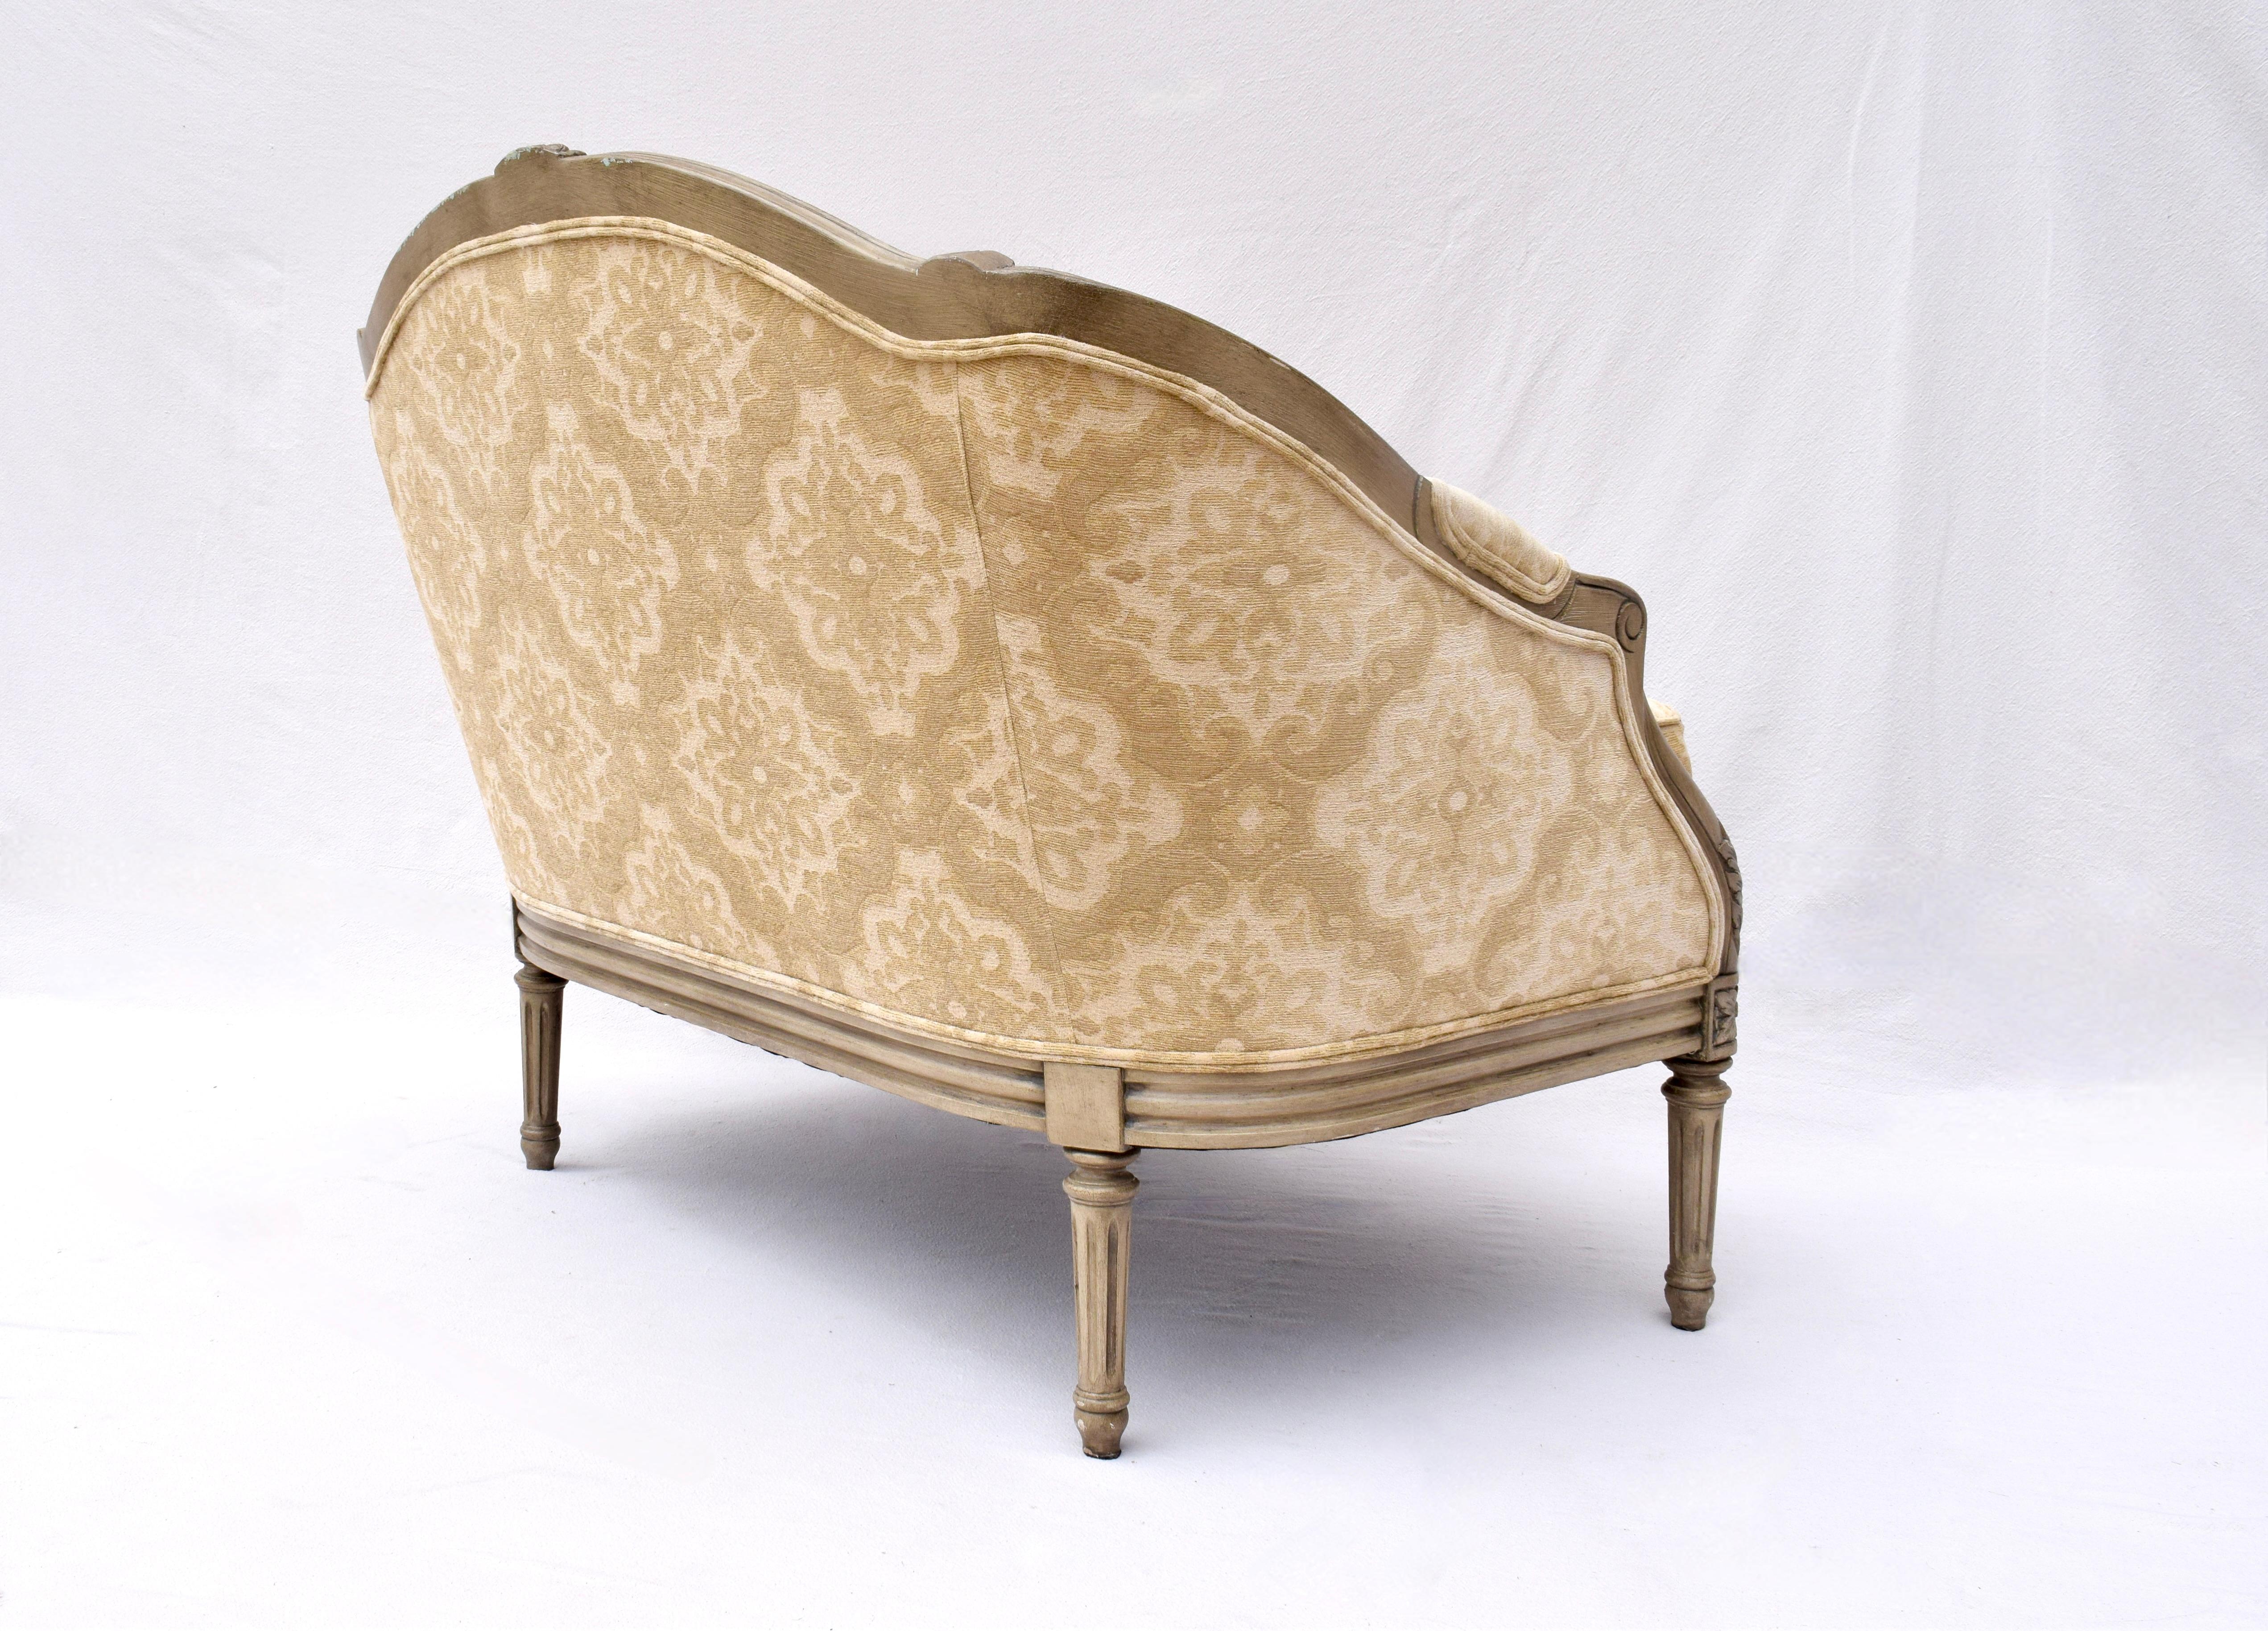 Contemporary French Louis XvI Style Marquise Chair & Ottoman For Sale